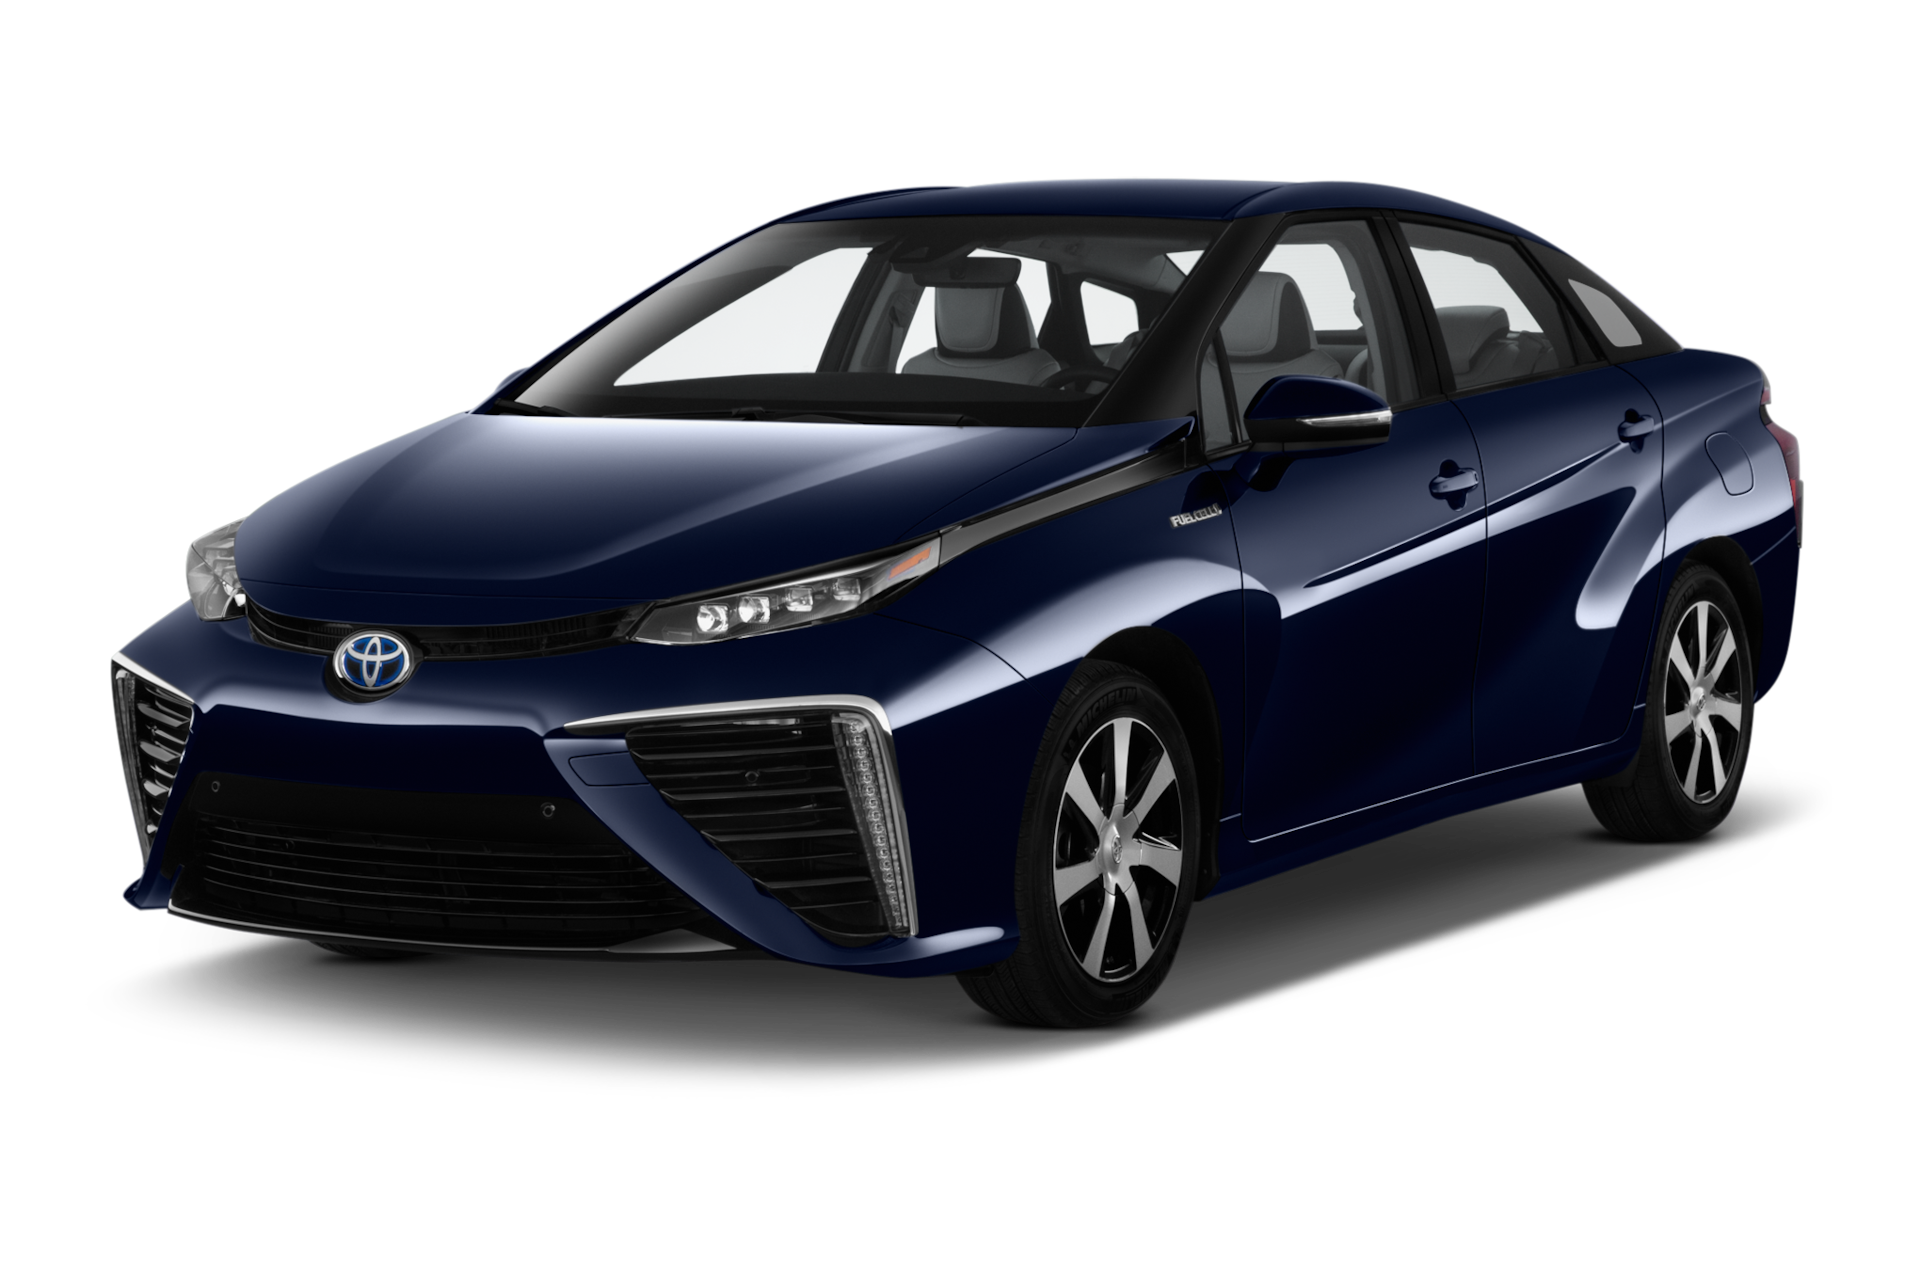 2018 Toyota Mirai Prices, Reviews, and Photos - MotorTrend